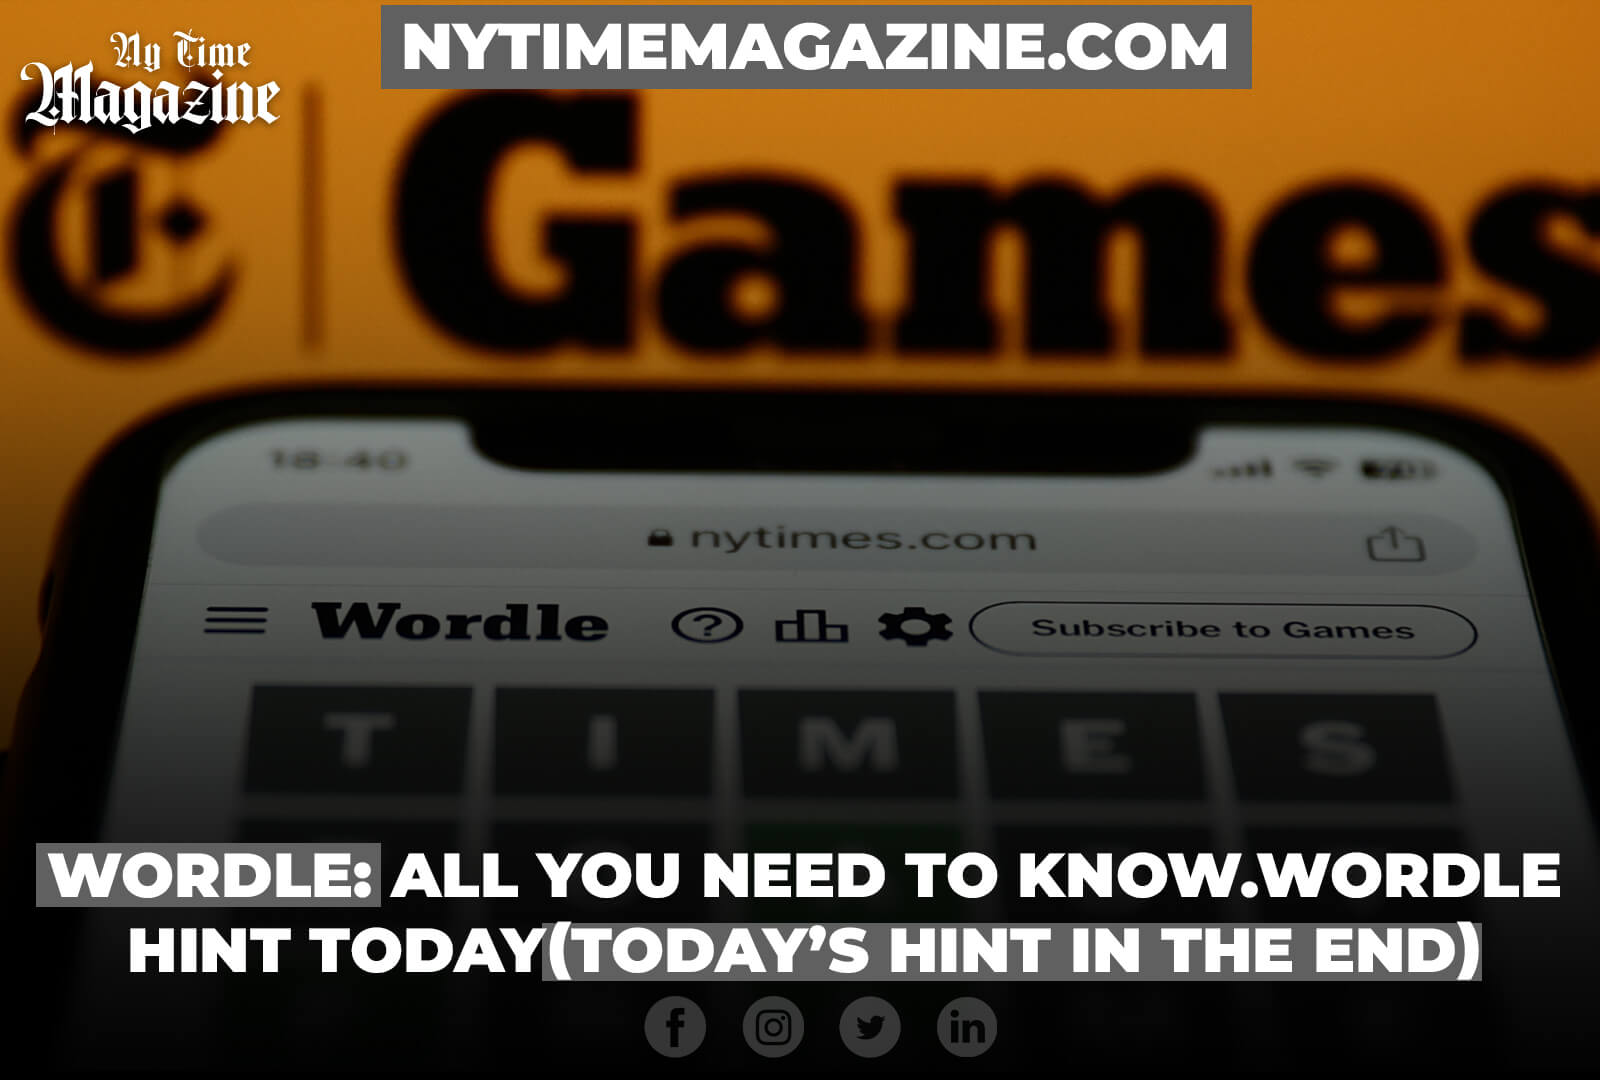 Wordle: All You Need to Know. Wordle Hint Today, Newsweek, and Much More. (Today’s Hint in The End)